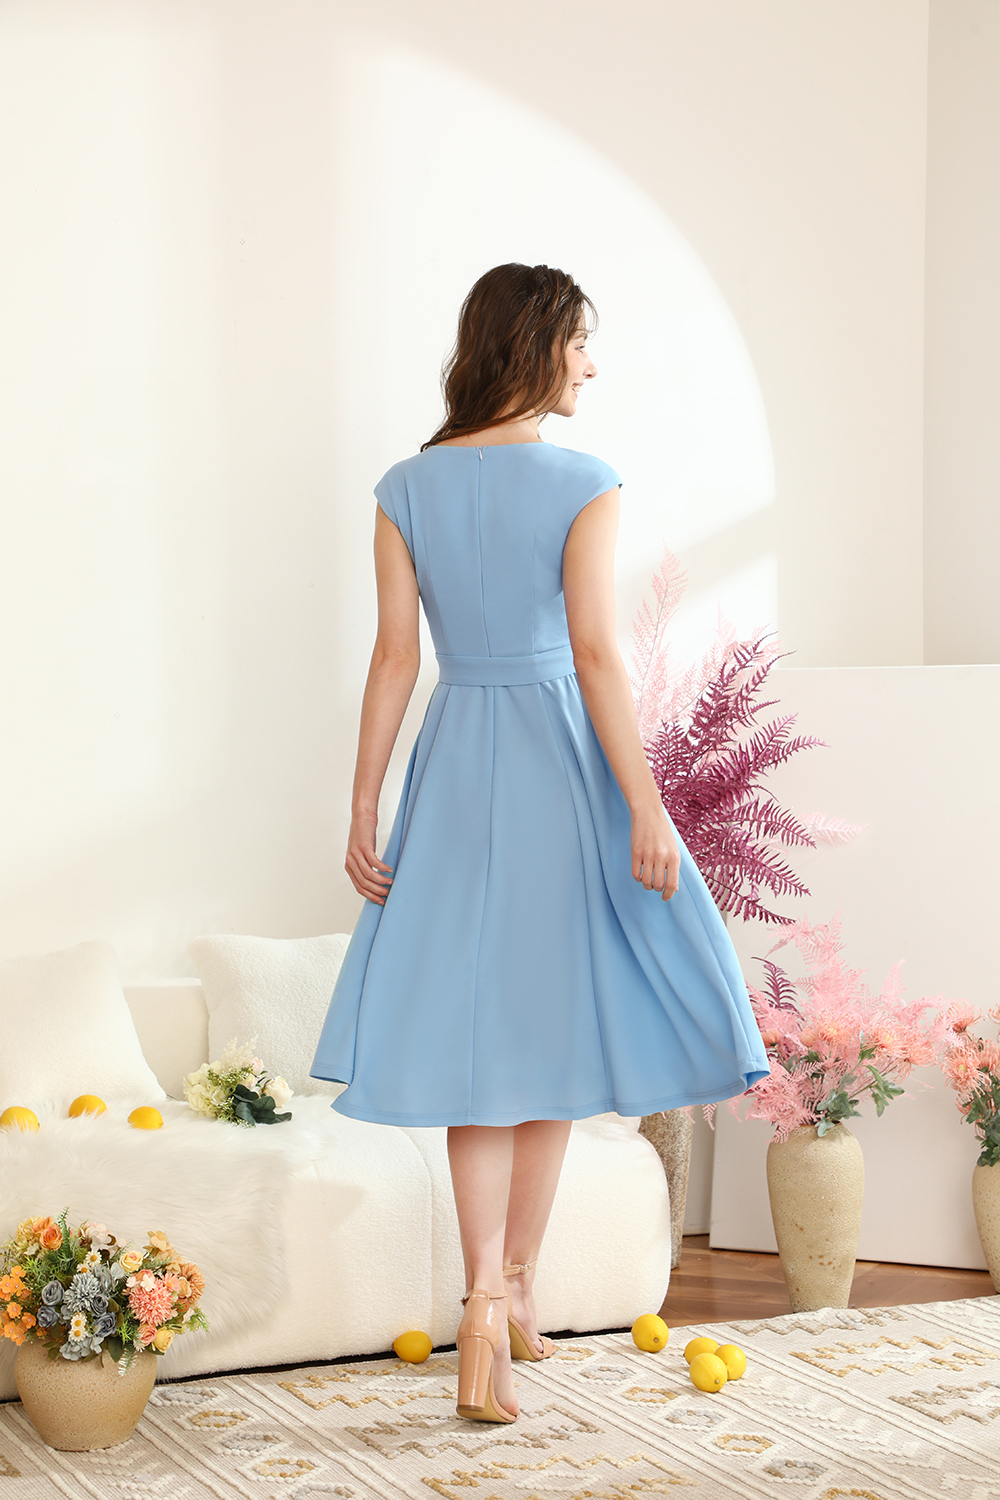 A-Line Knee-Length Blue Cocktail Dress with Cap Sleeves, Vintage Style, Unique and Elegant